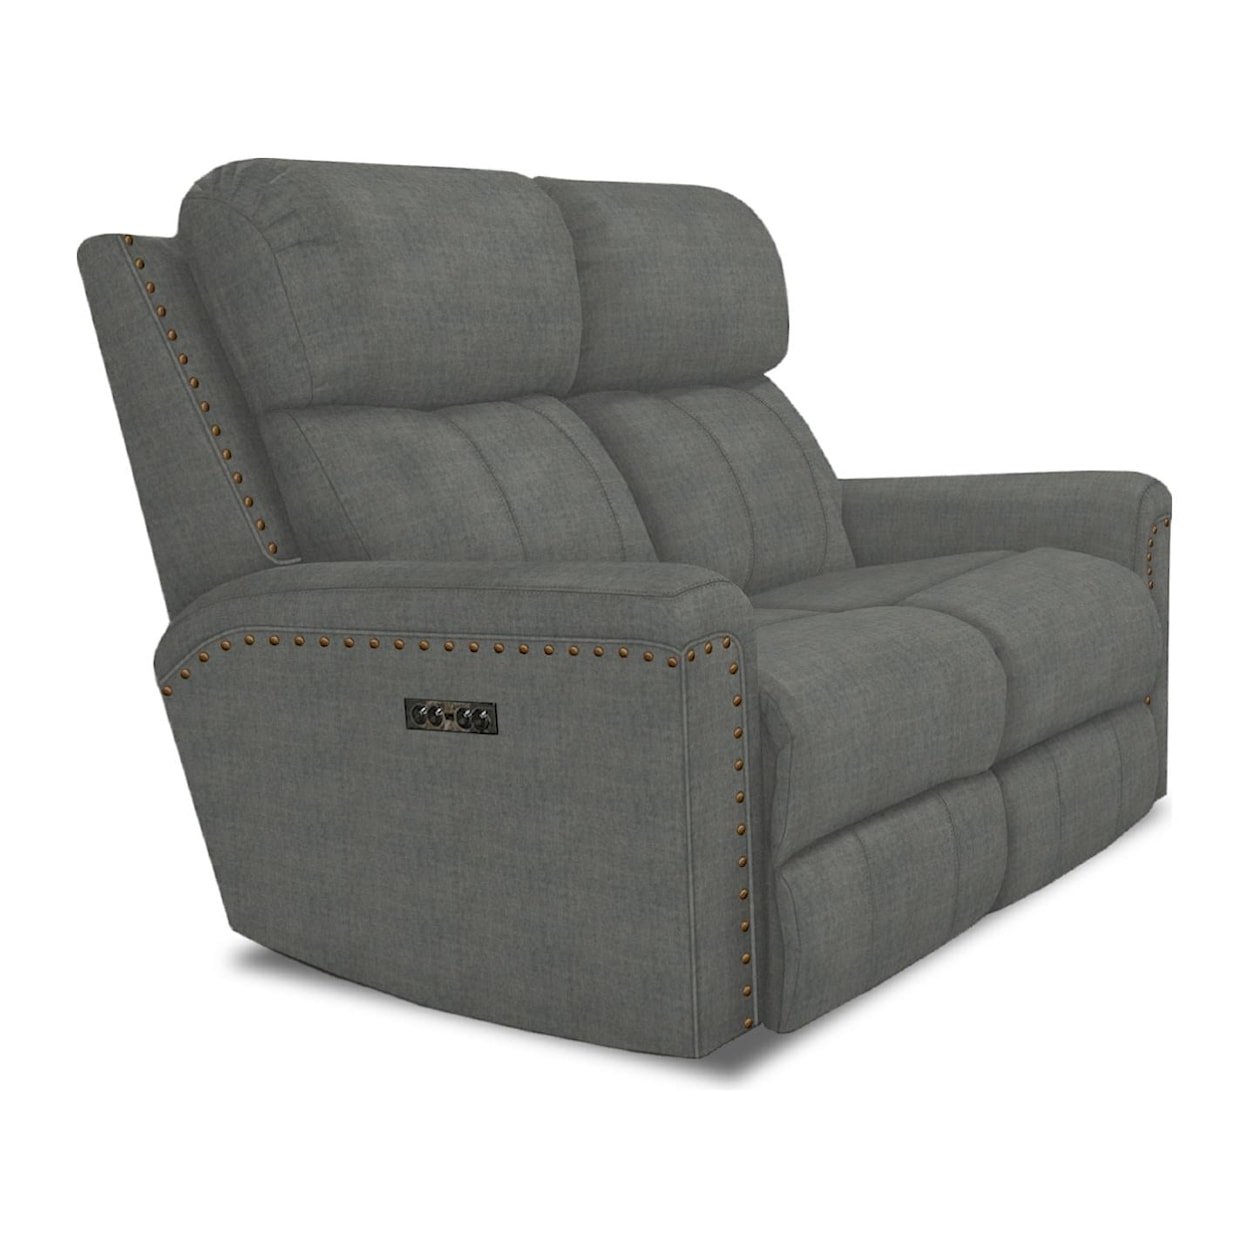 England EZ1C00/H/N Series EZ1C00 Double Reclining Loveseat with Nails